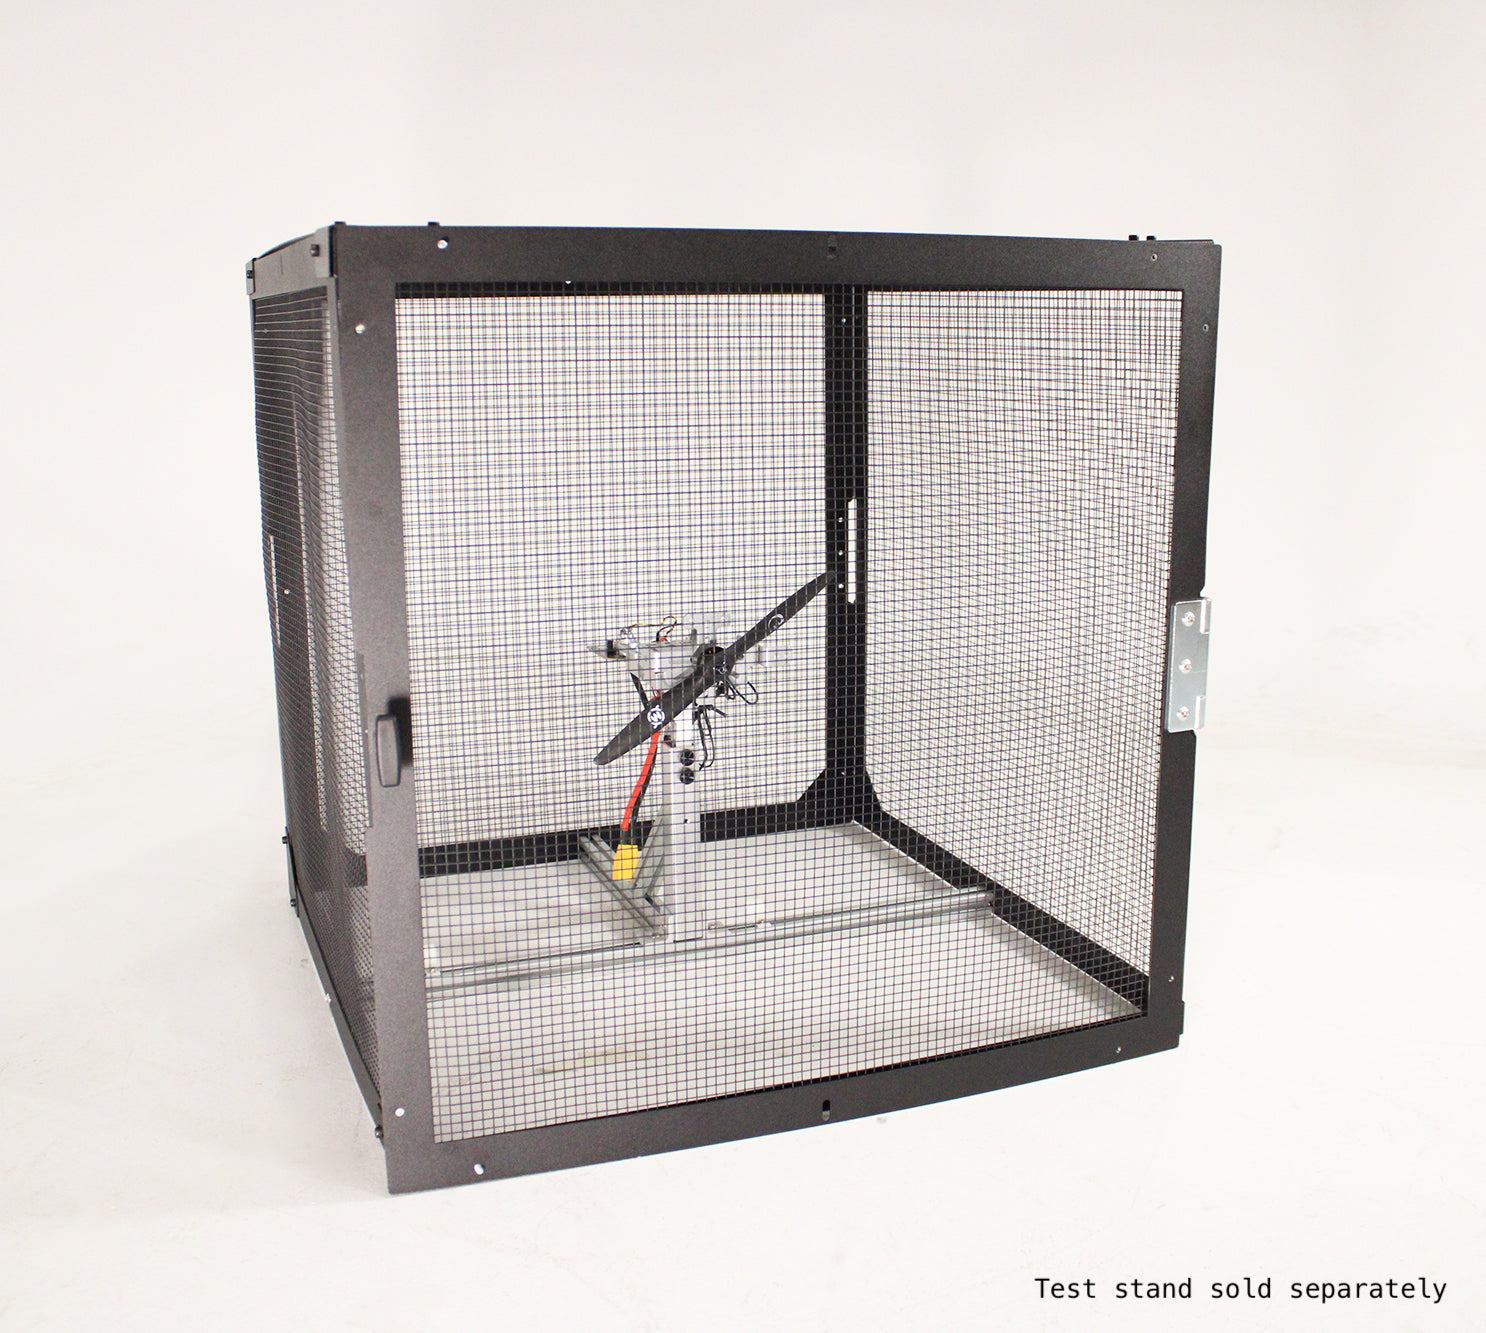 Motor test stand enclosure / safety cage